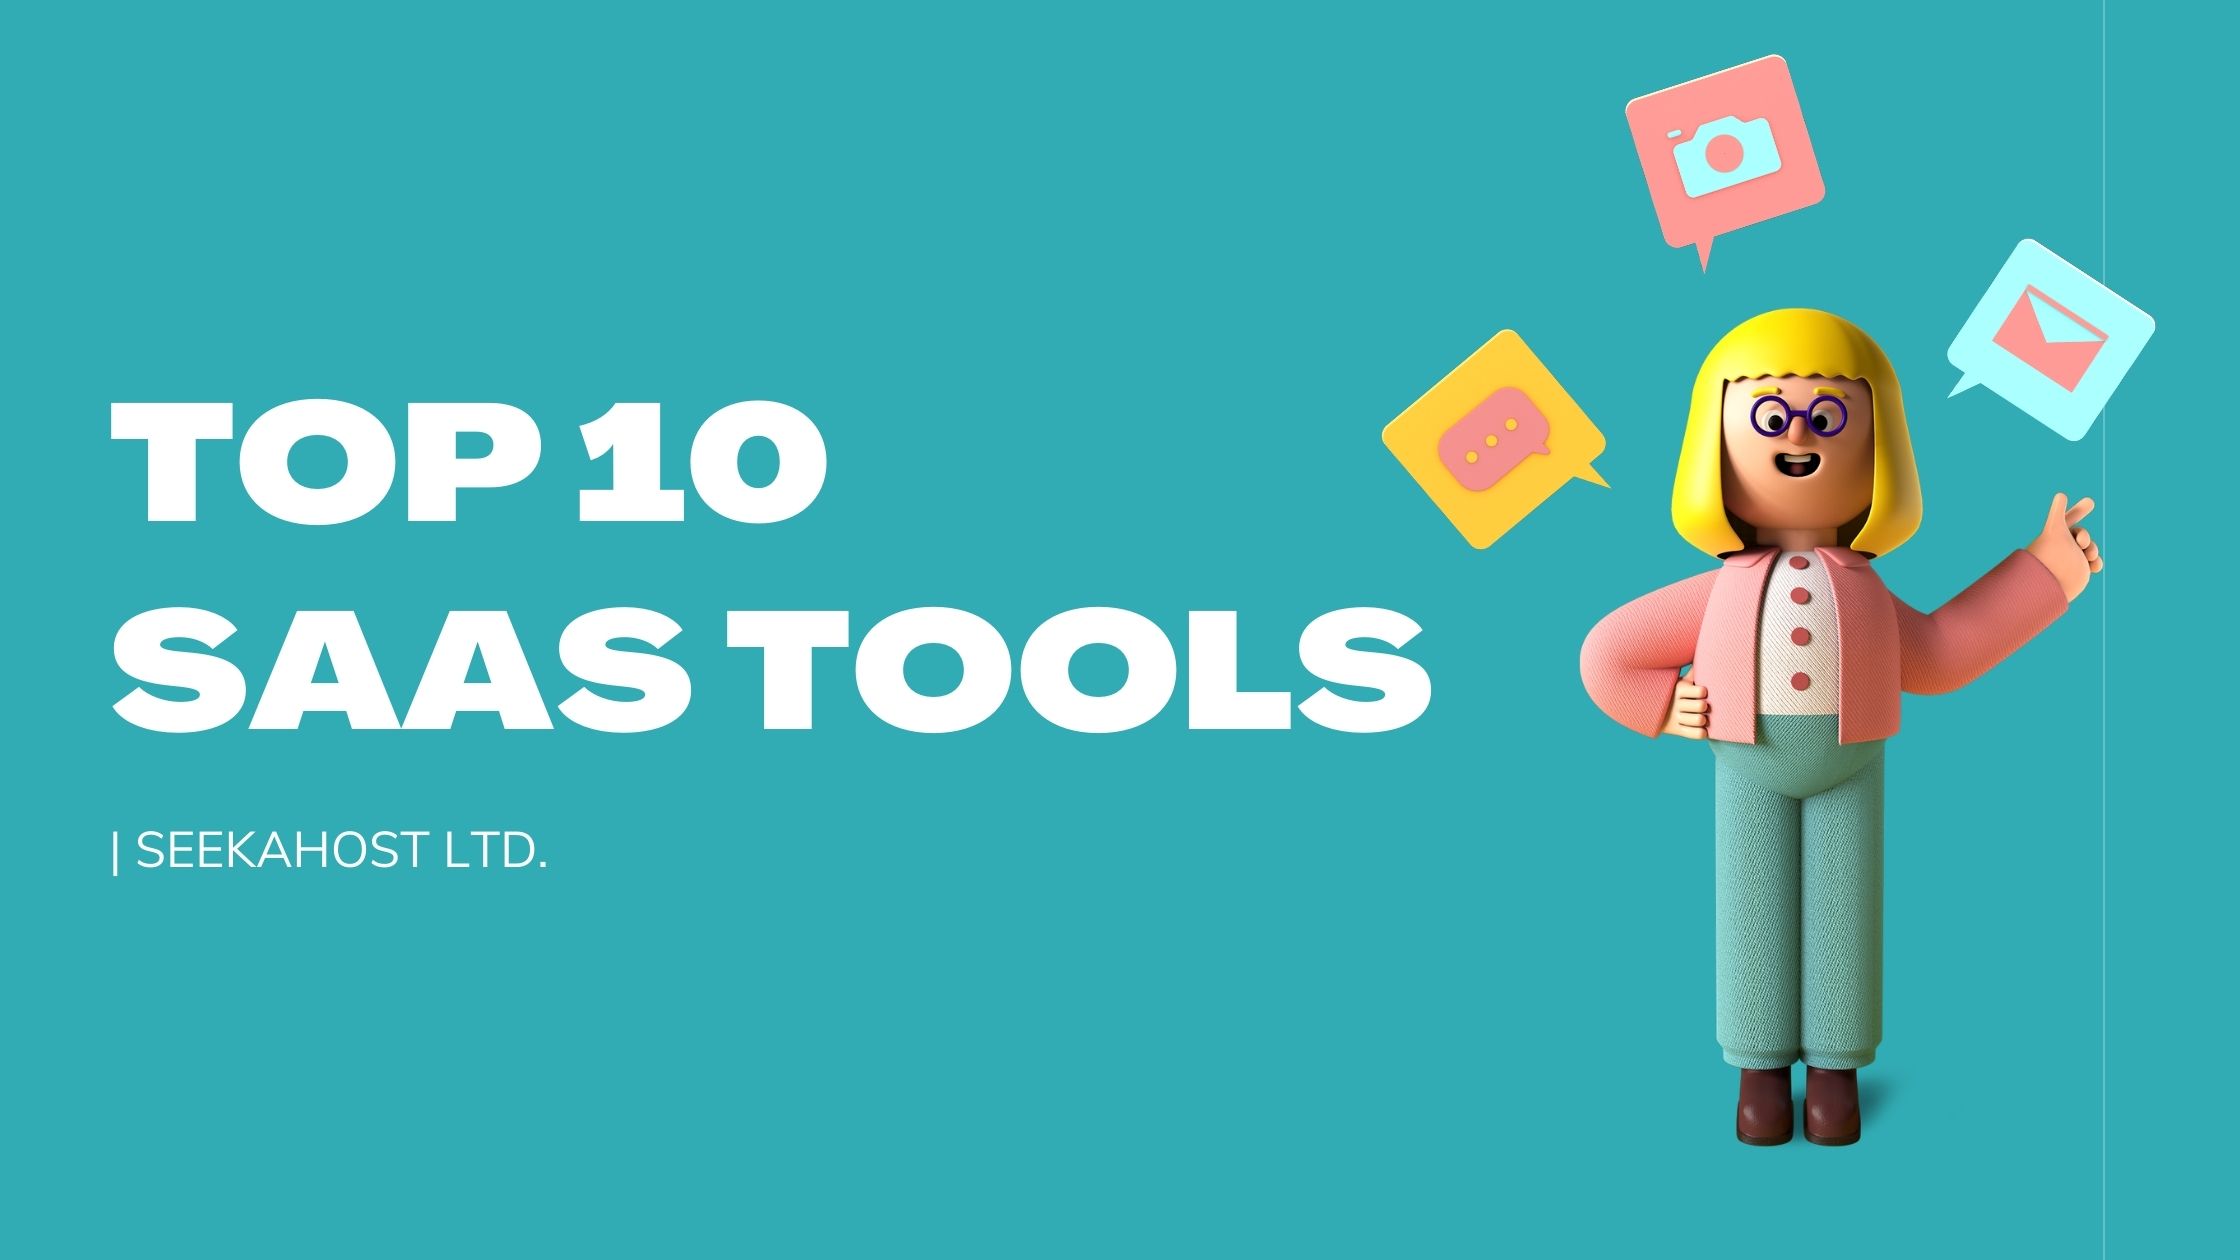 Top 10 Saas Tools For Business